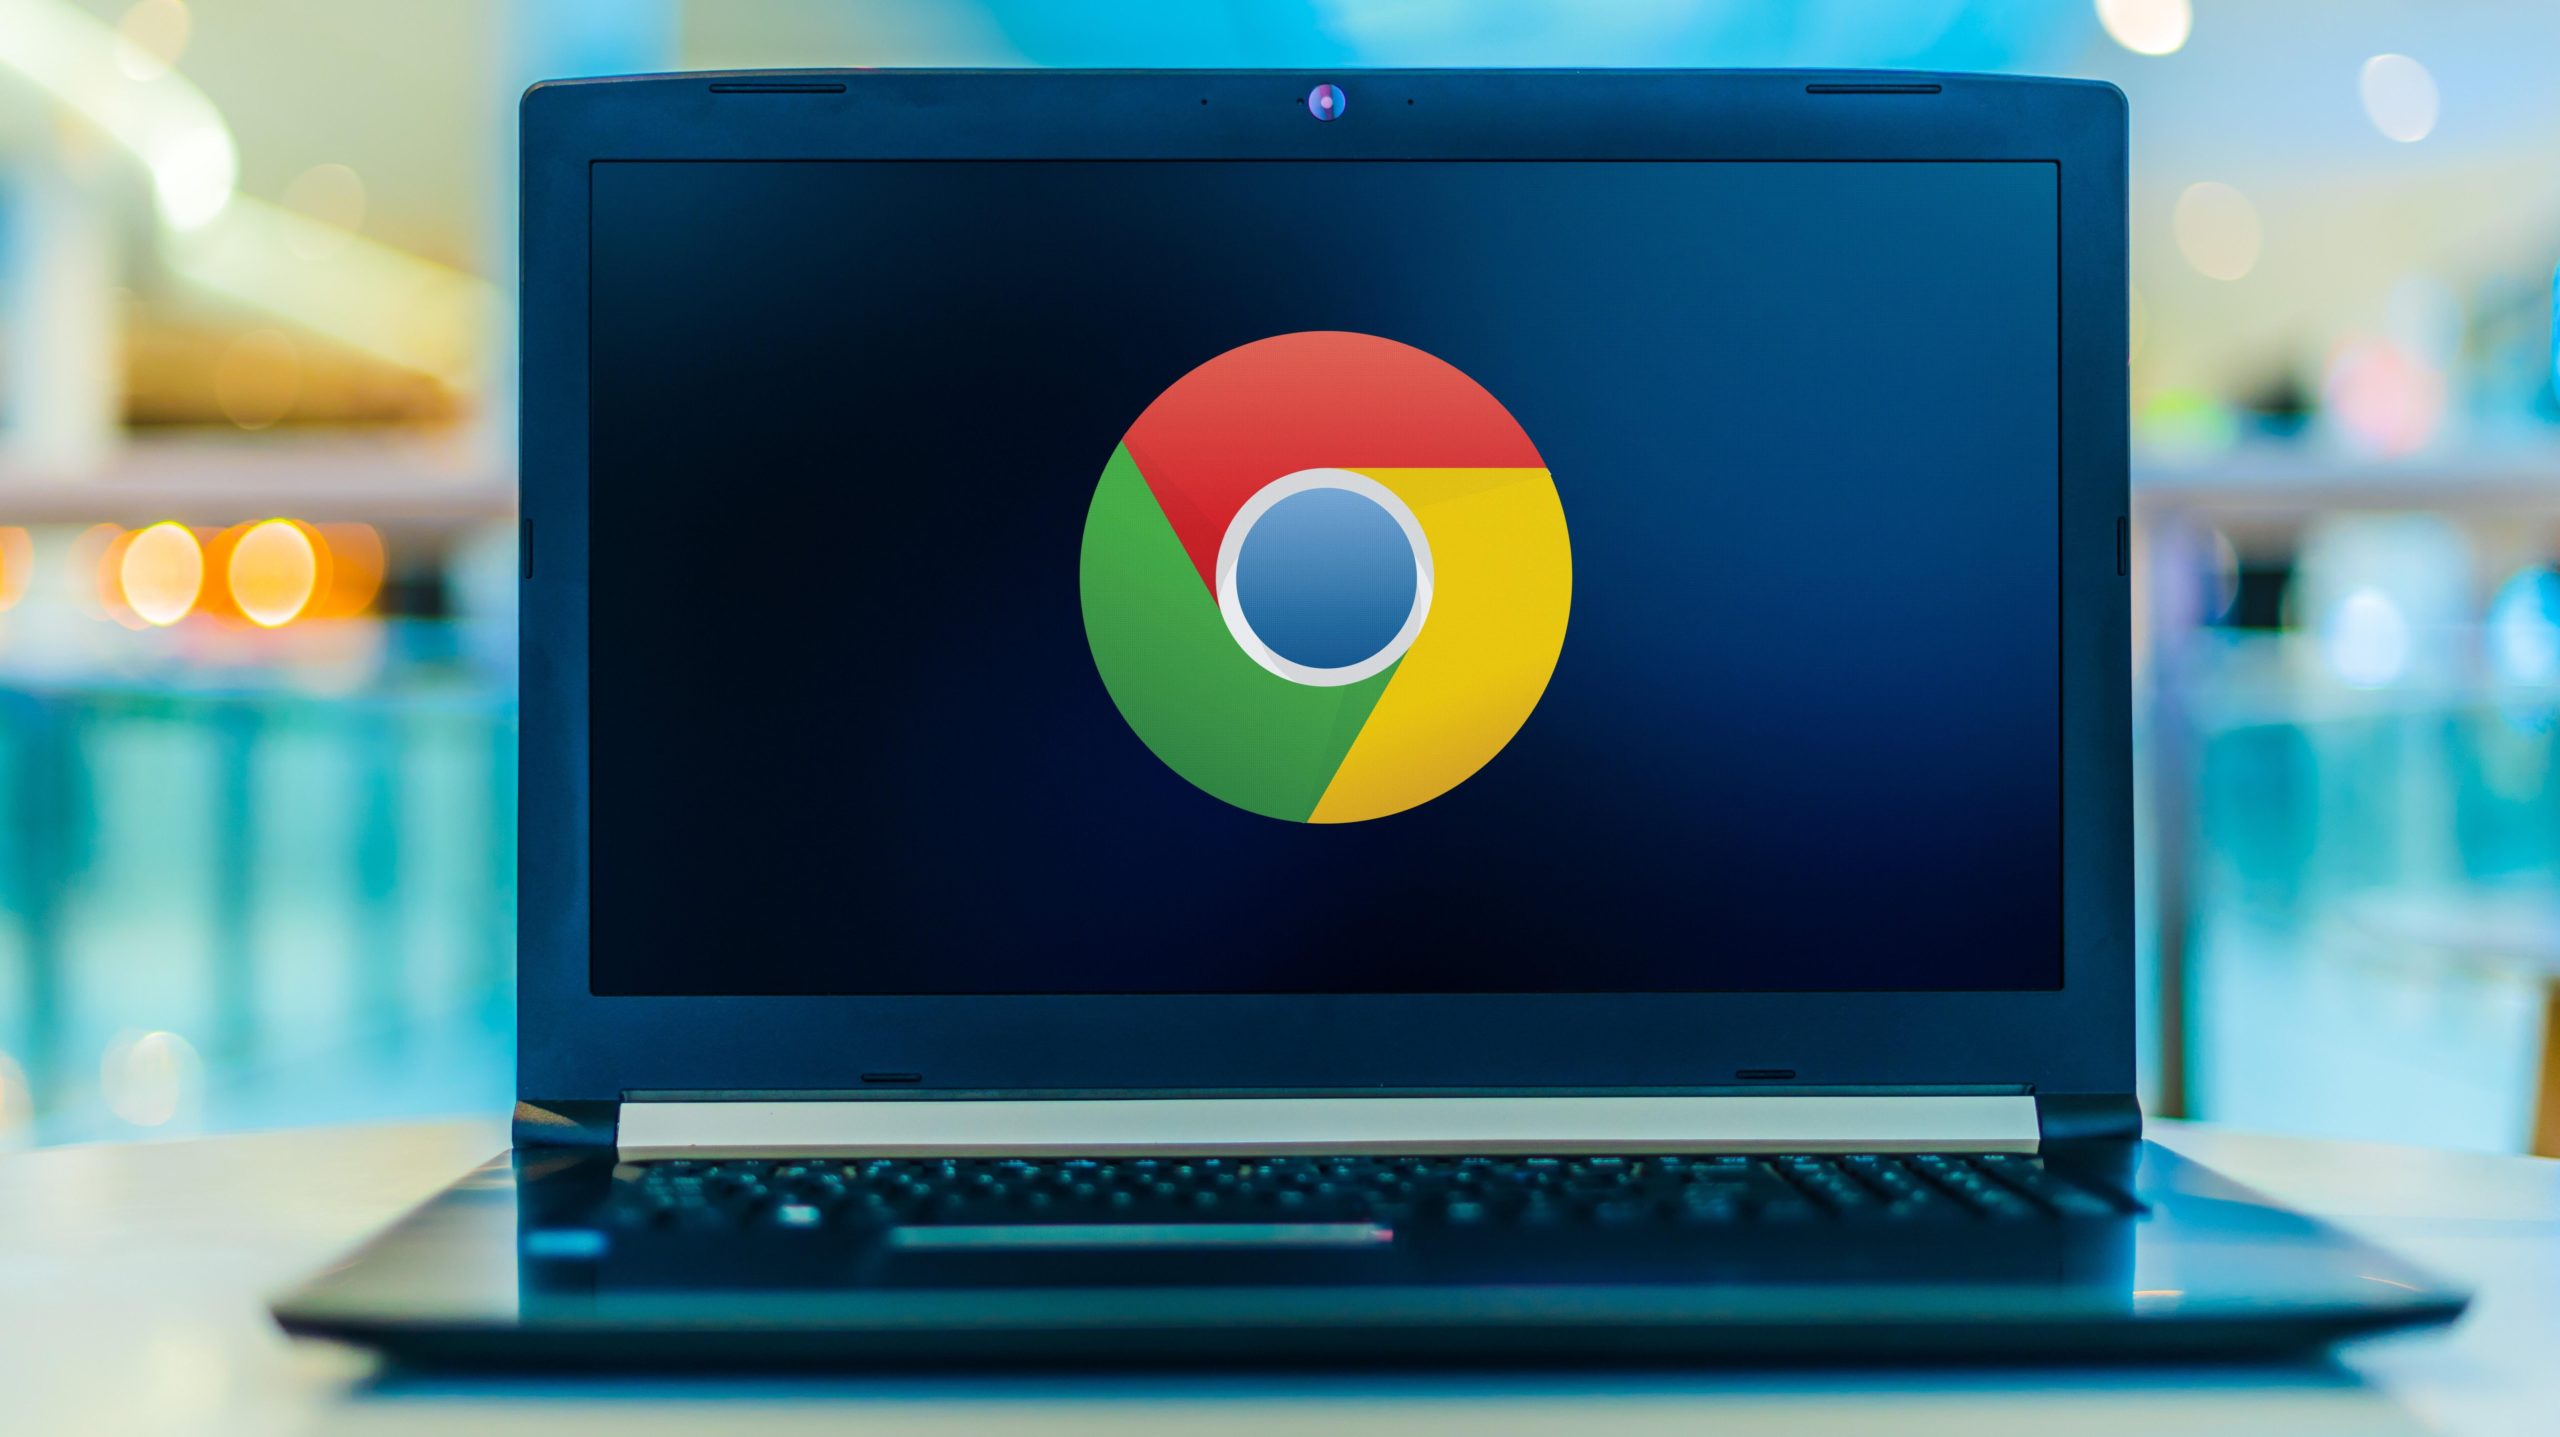 13 of the Best Chrome Extensions of 2021, According to Google